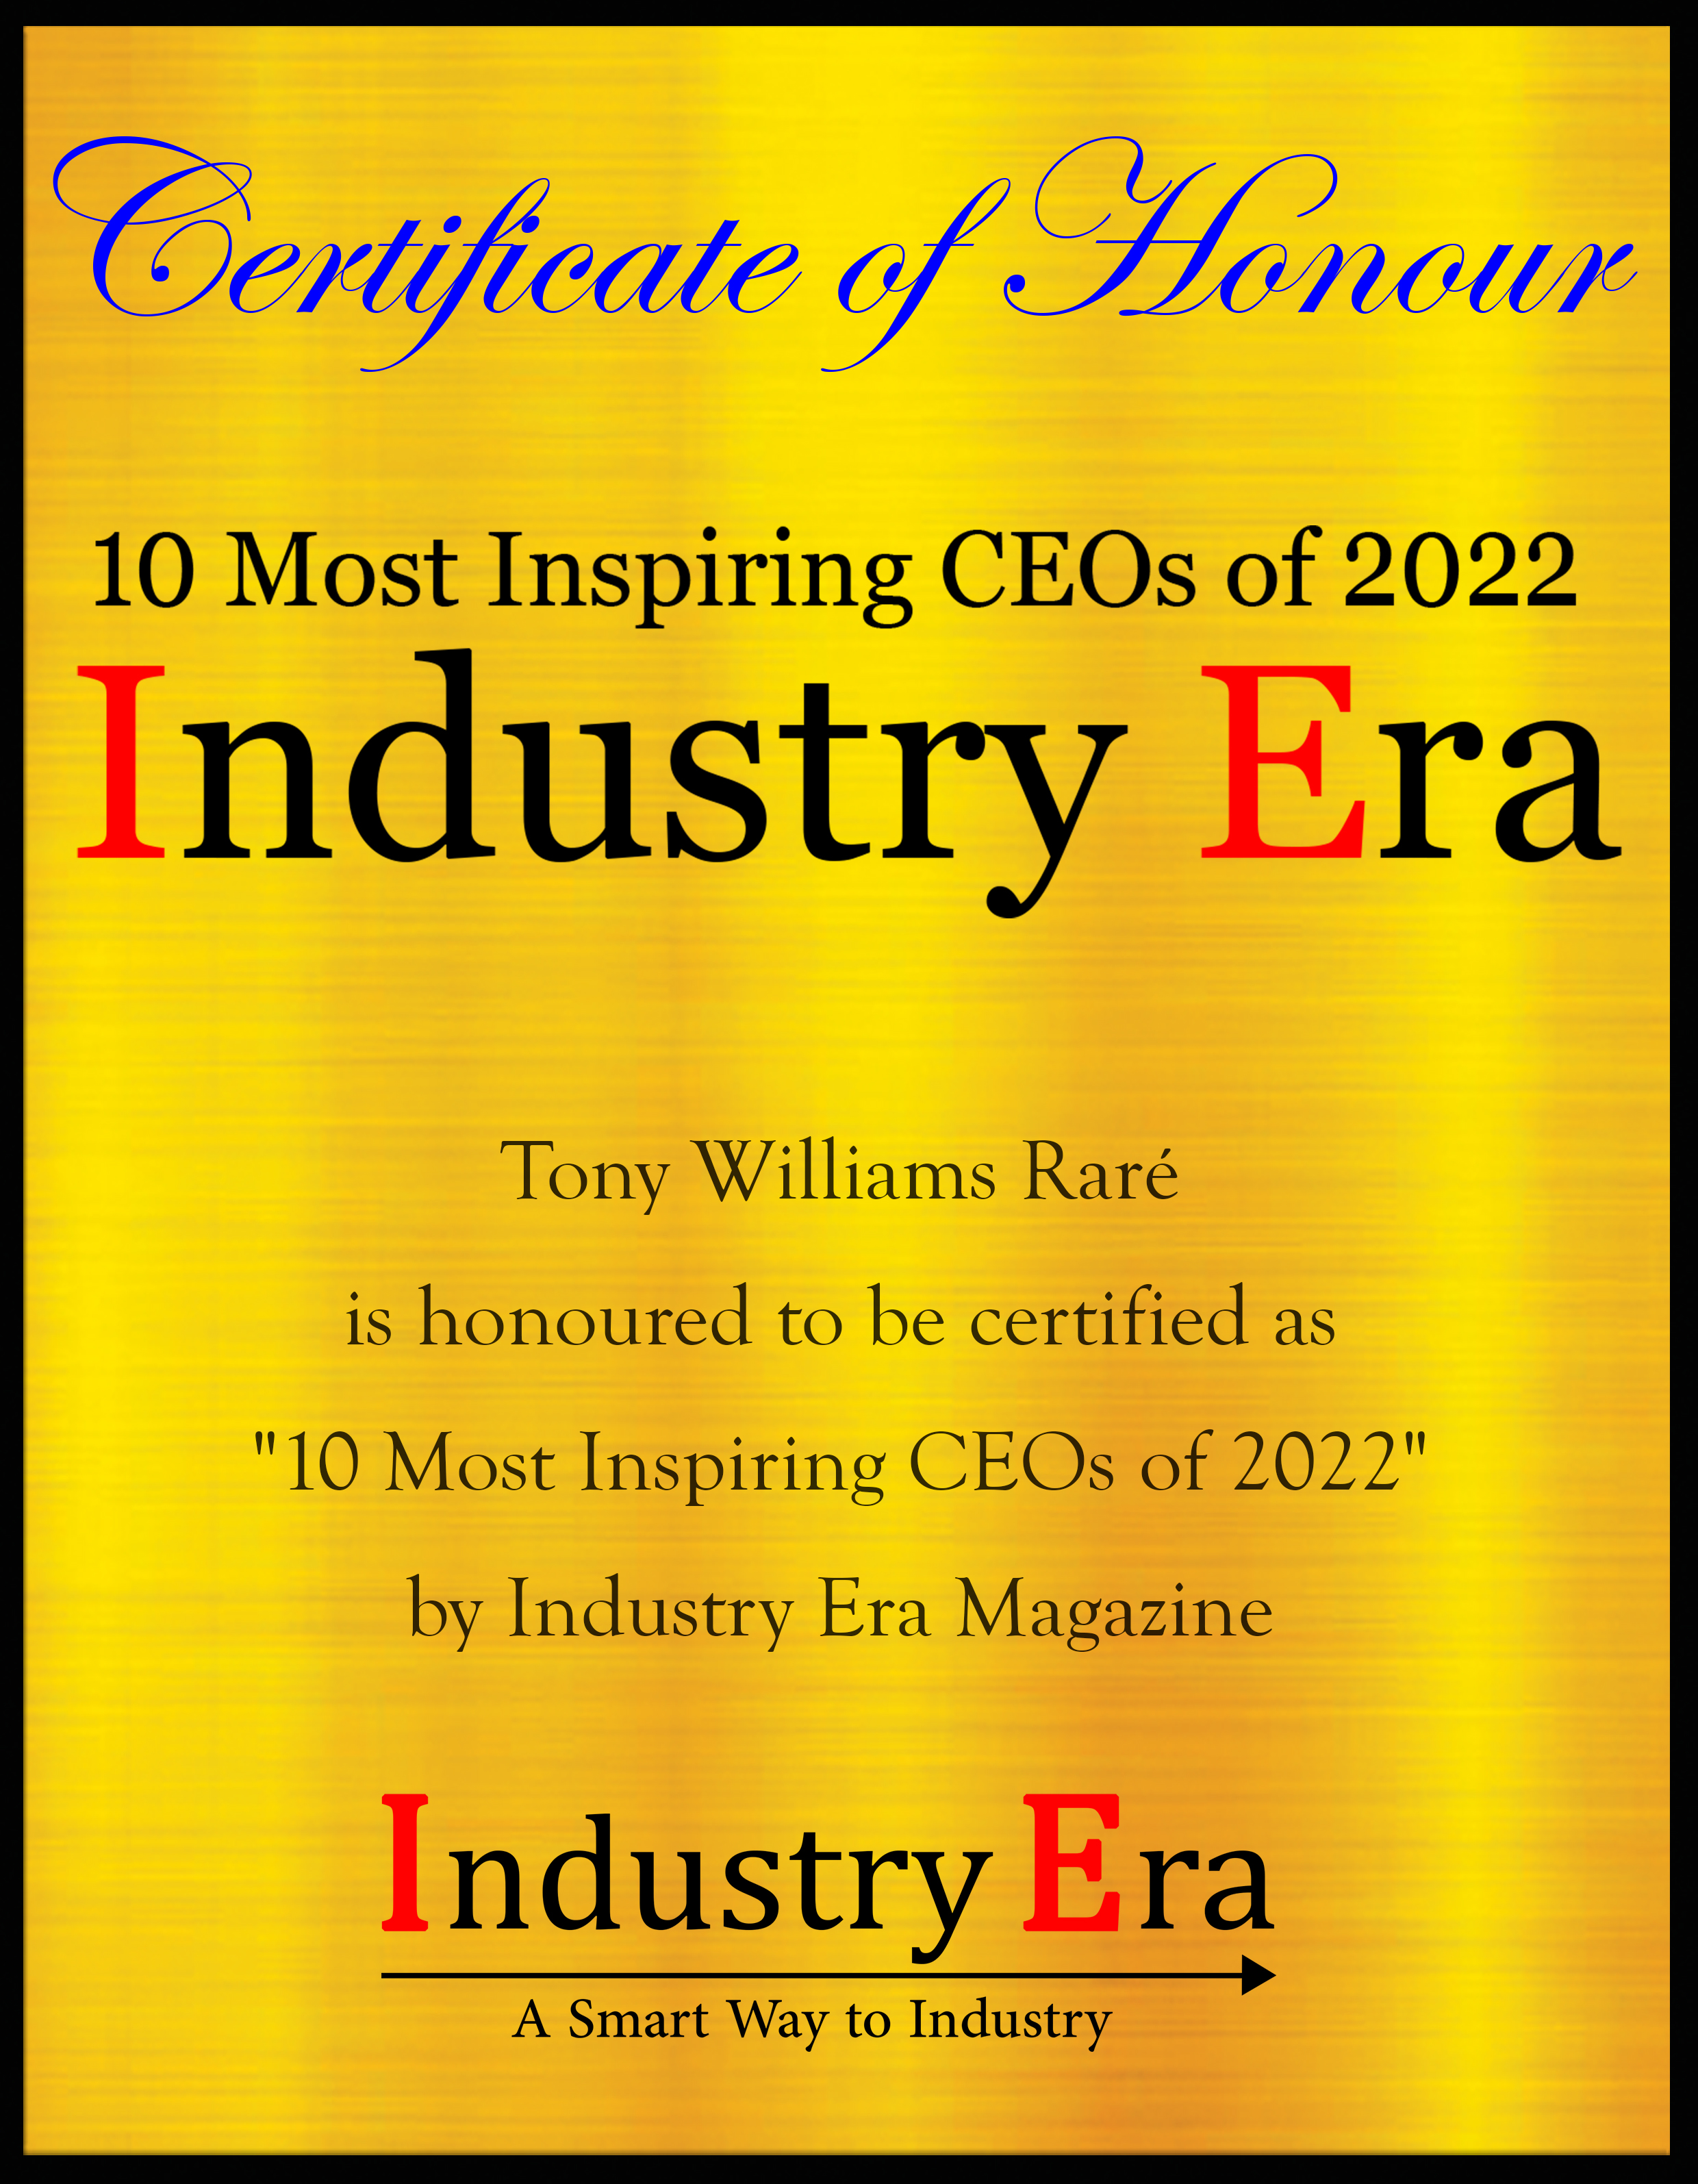 Tony Williams Rare, Chief Executive Officer of Global IT Certificate